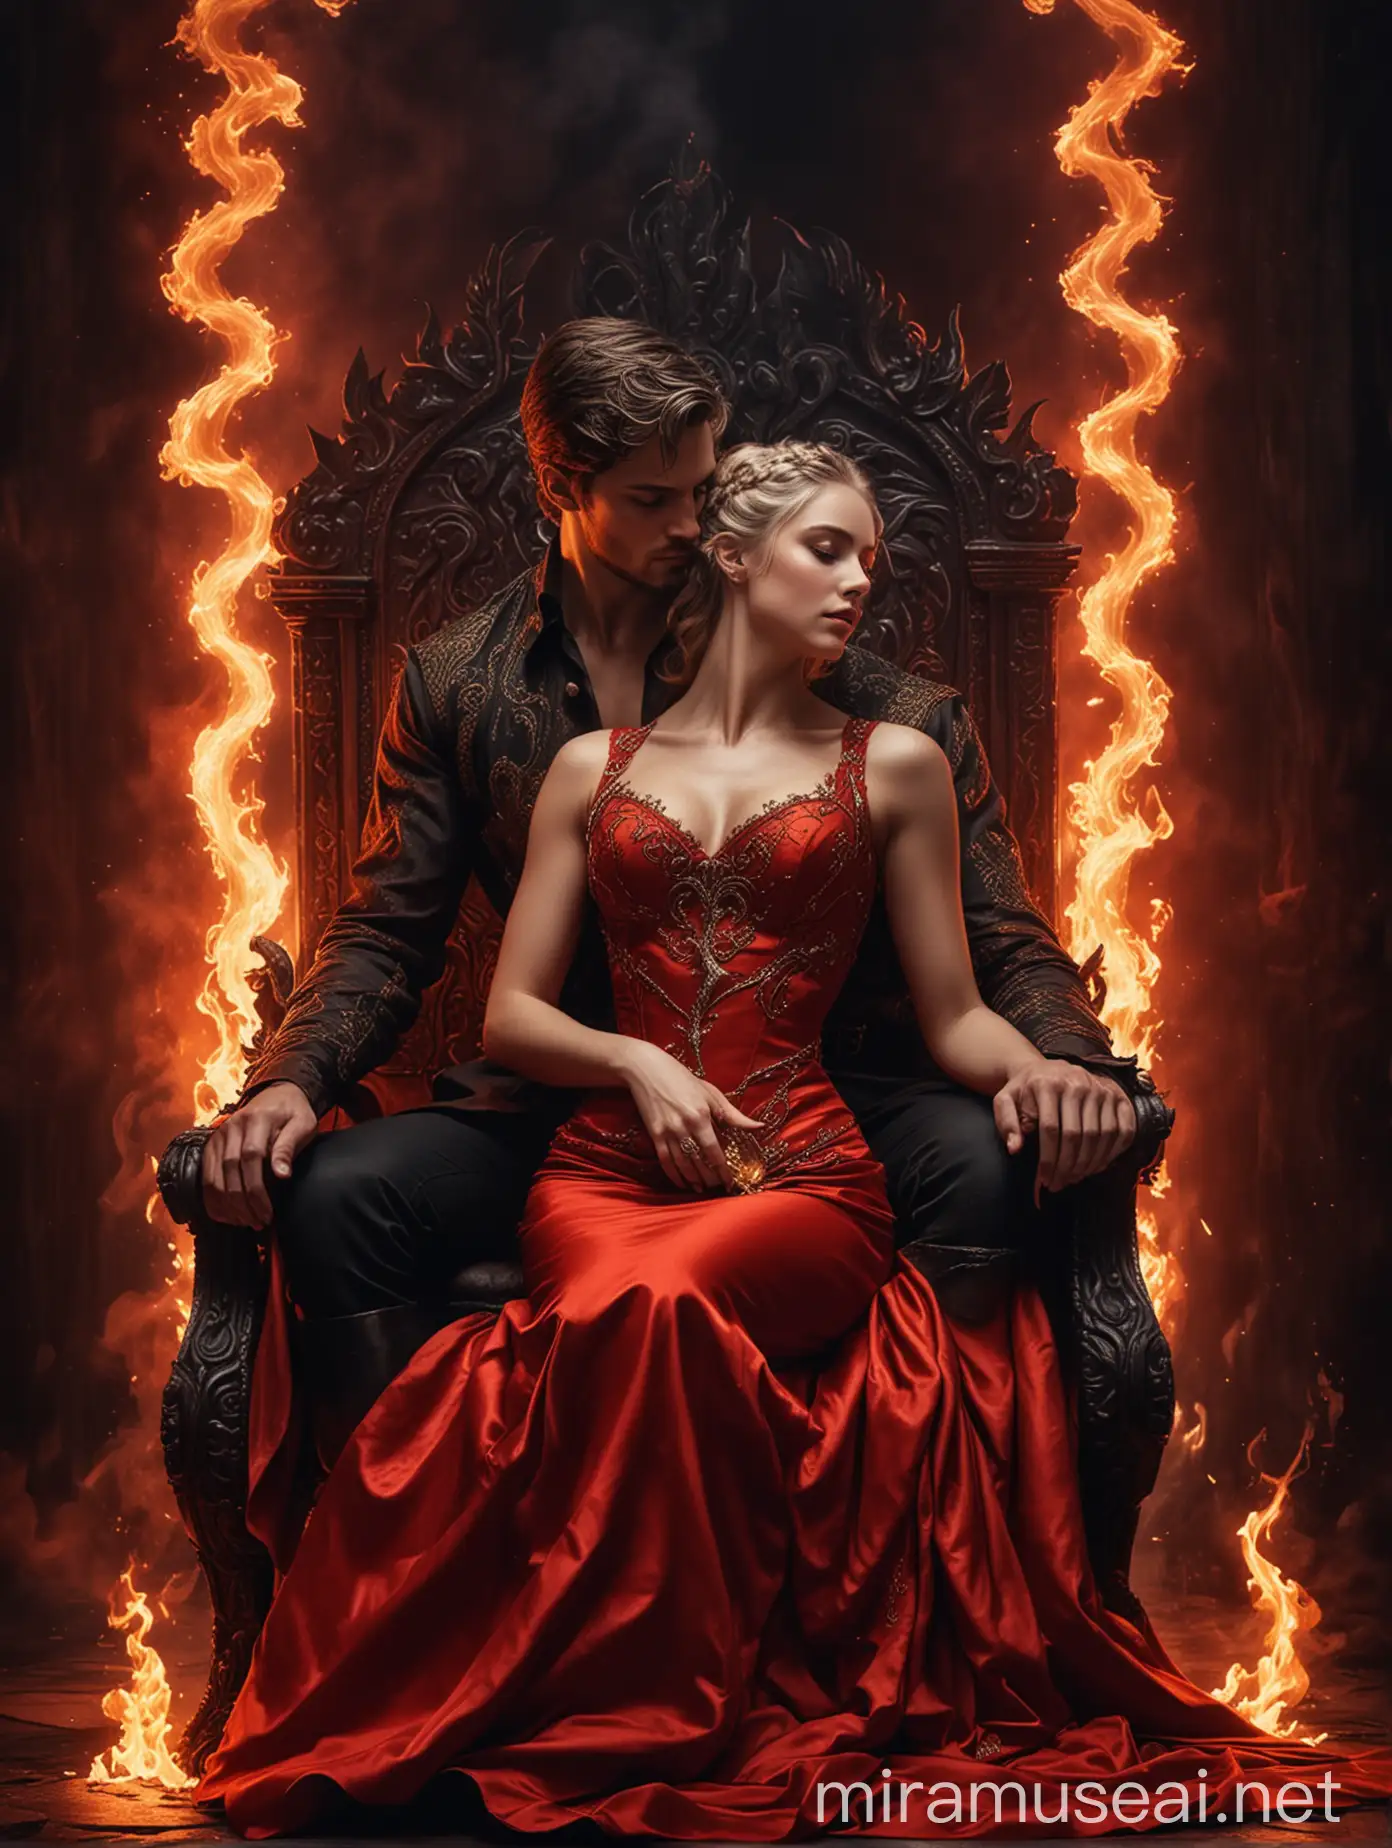 Romantic Couple in Red Royal Attire on Dark Throne with Serpent Flames